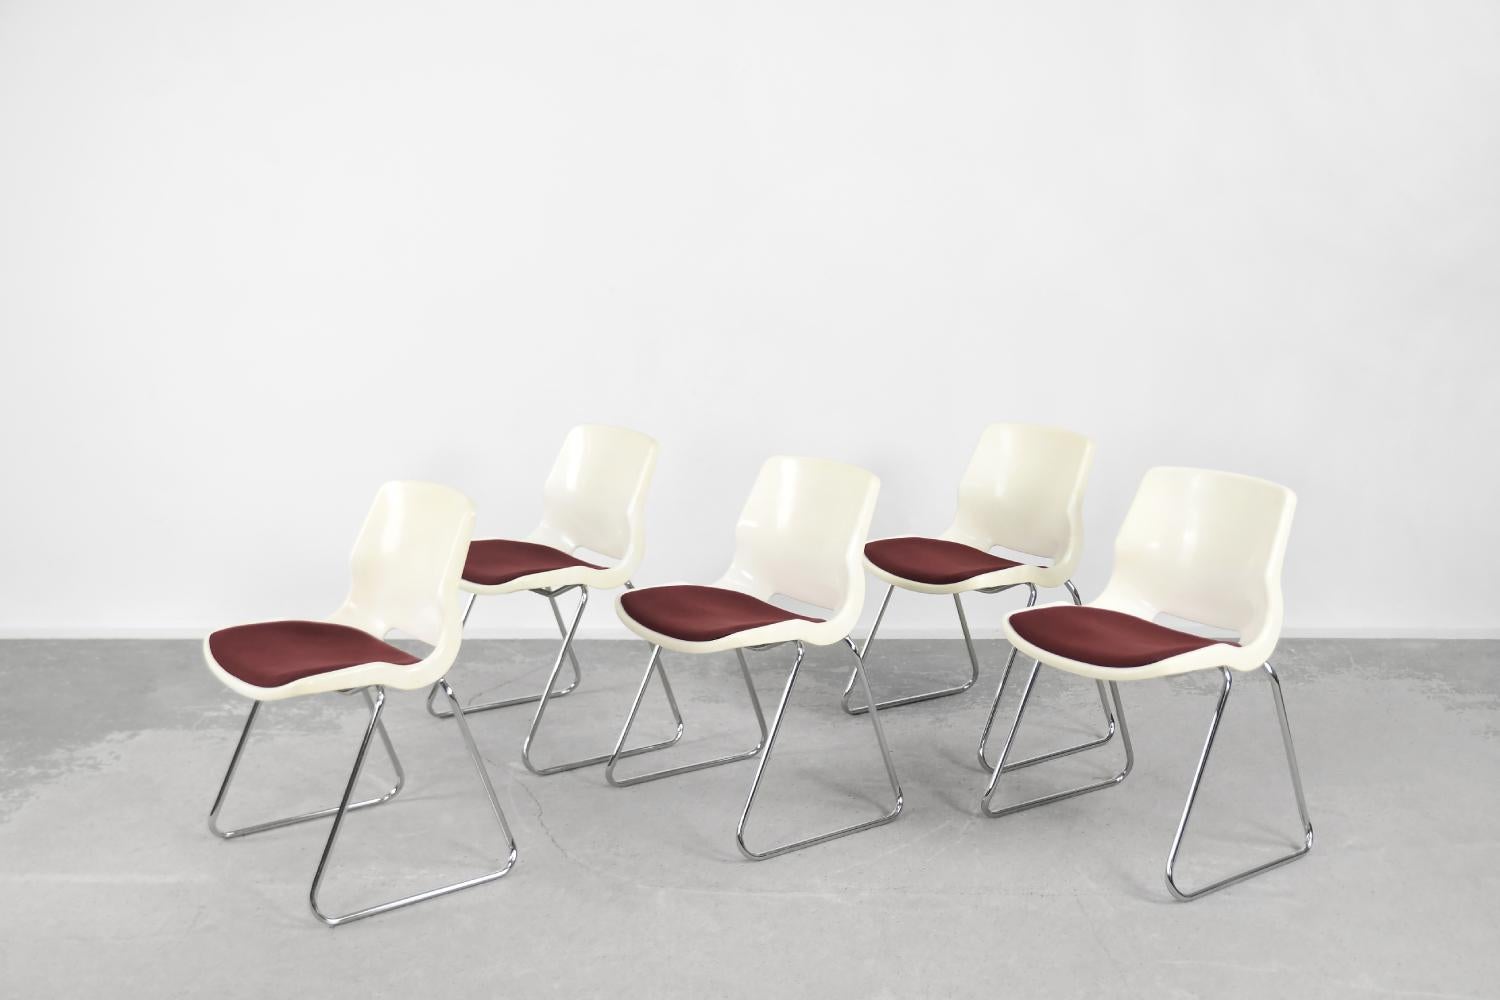 This set of chairs was designed by Svante Schöblom for the Swedish Overman manufacture during the 1970s. They were produced in several colors, but the white design is the most universal. It adapts to any space and perfectly combines functionality